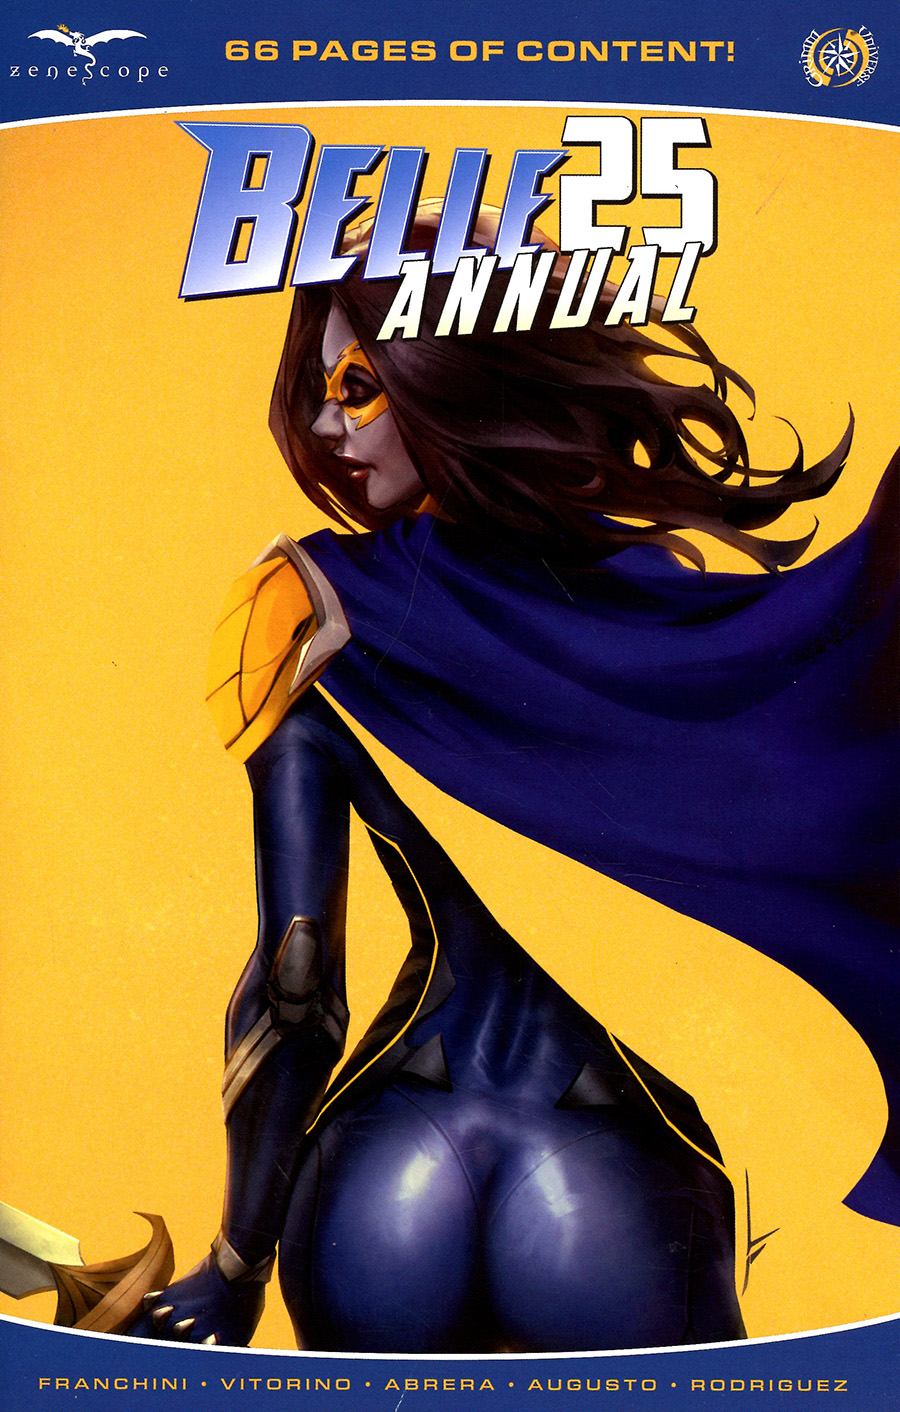 Grimm Fairy Tales Presents Belle #25 Annual Cover C Ivan Tao